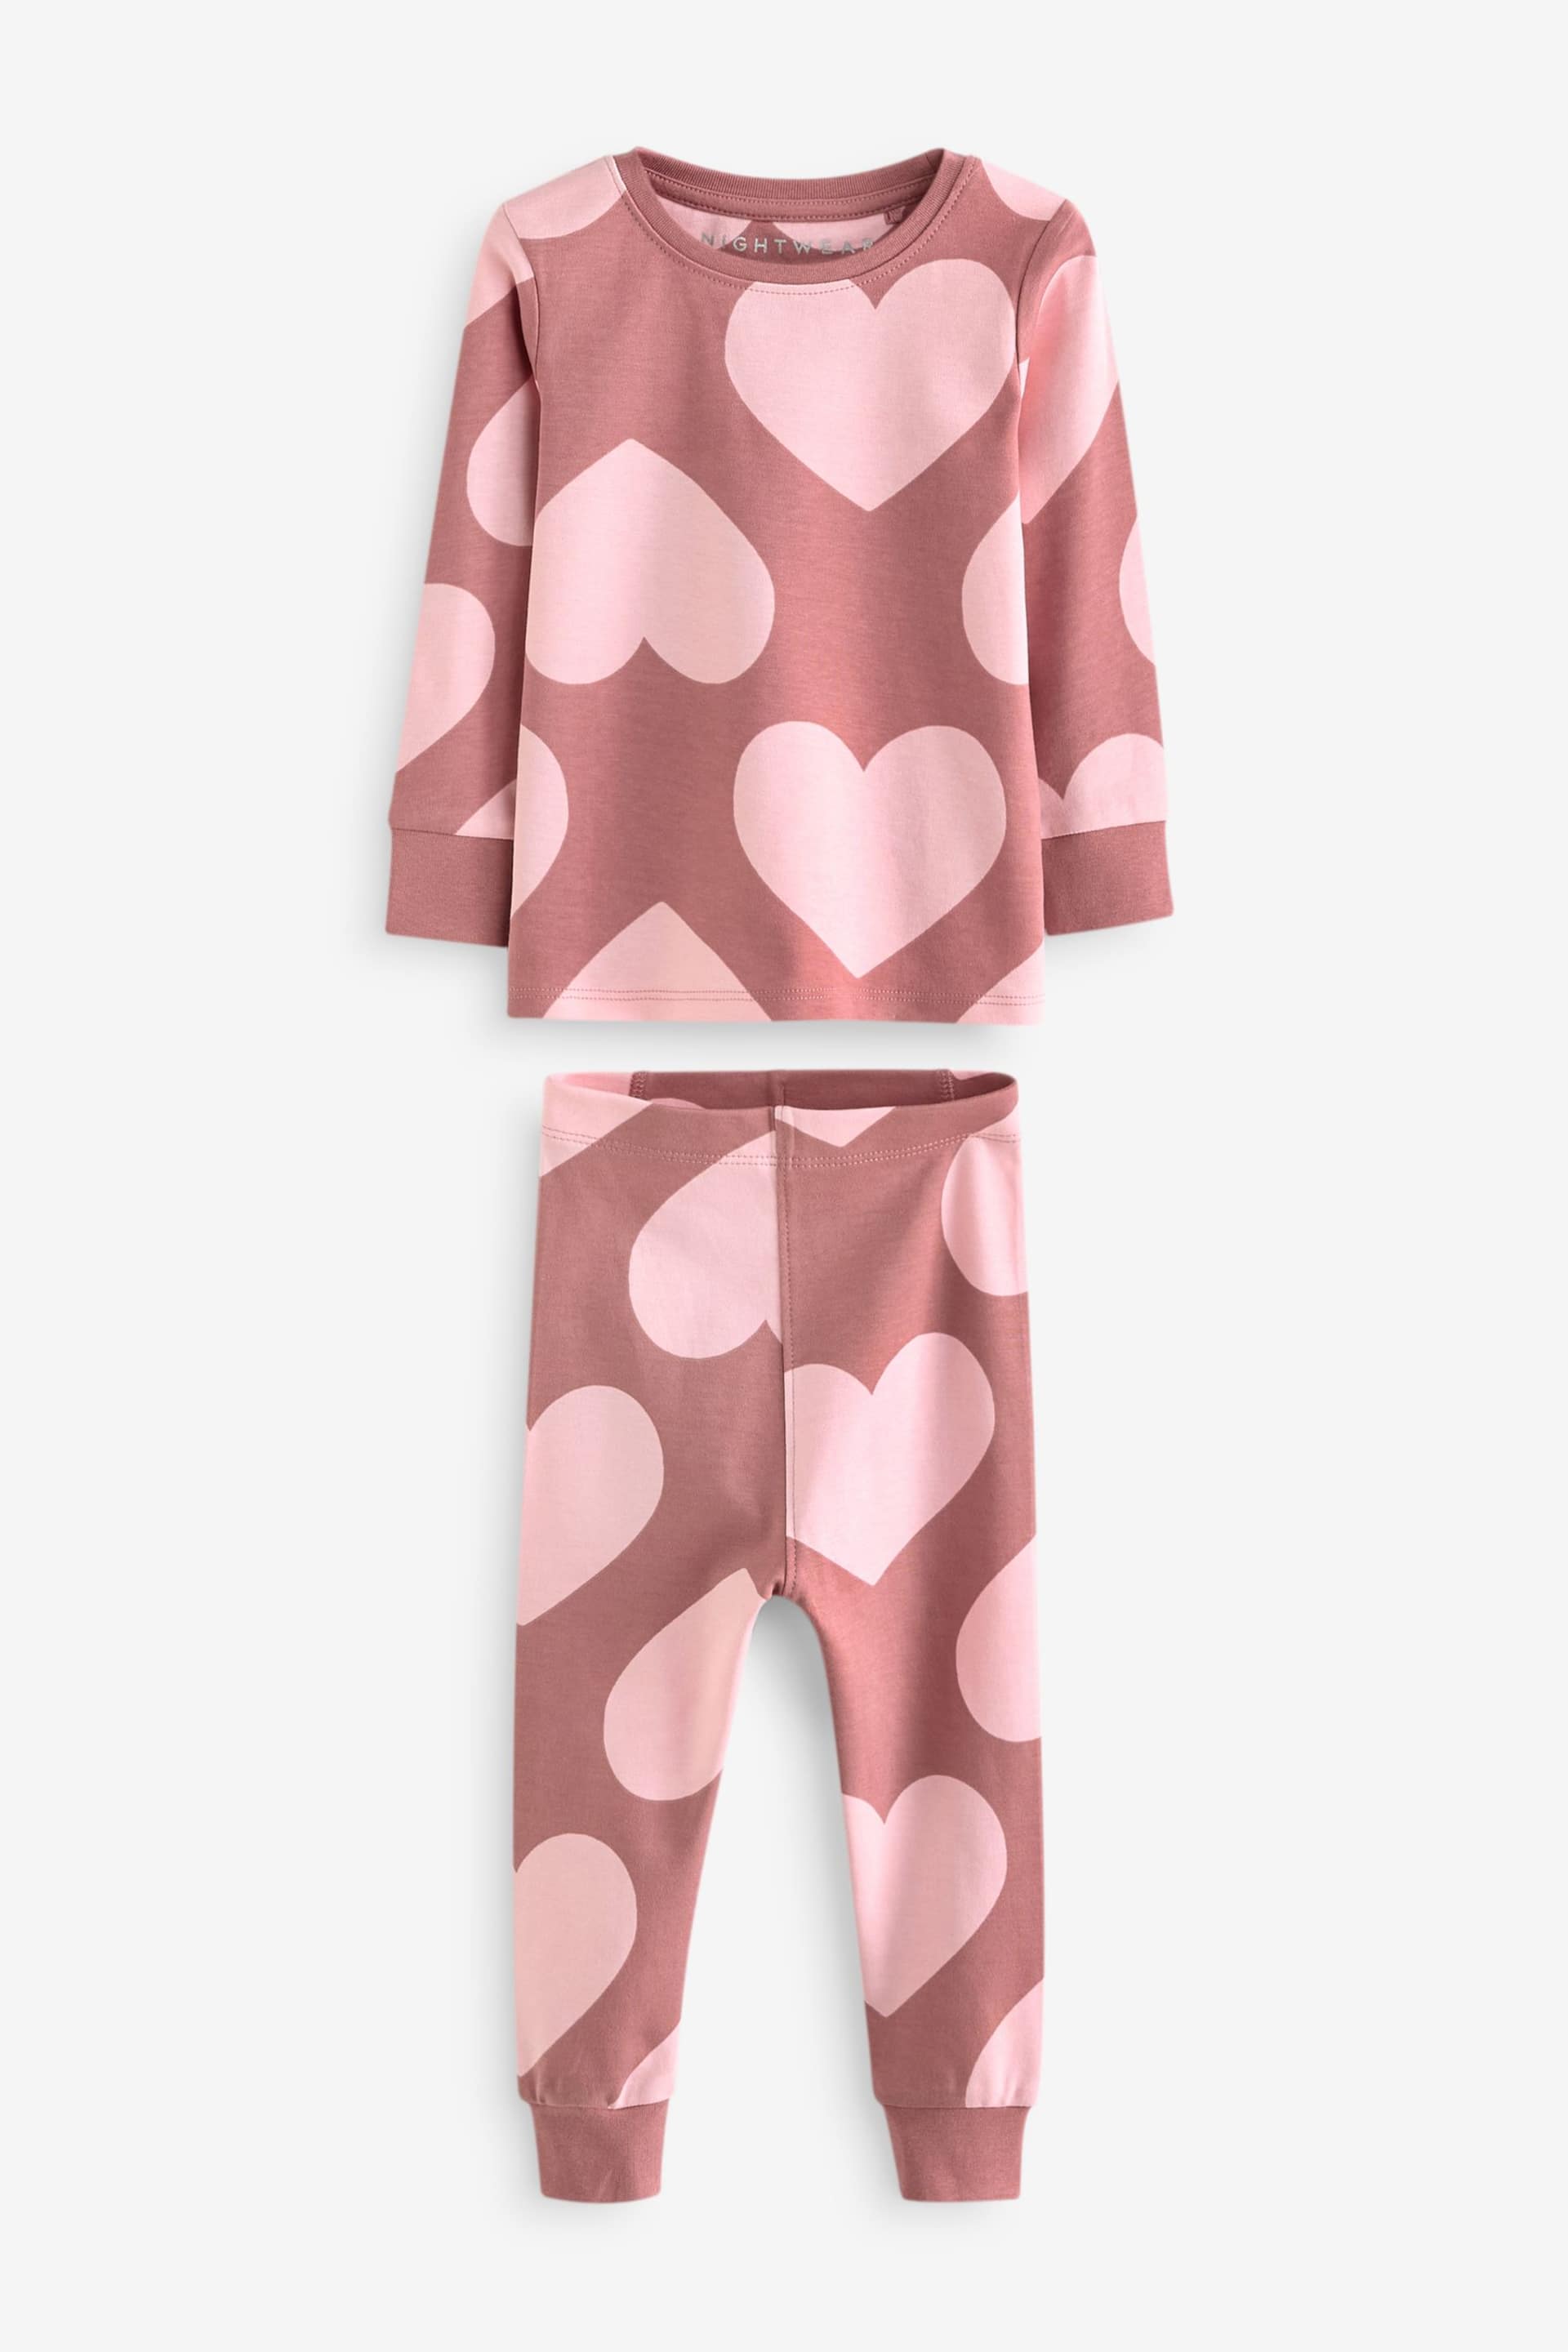 Neutral/ Pink Heart Stampy Pyjamas 3 Pack (9mths-16yrs) - Image 7 of 13